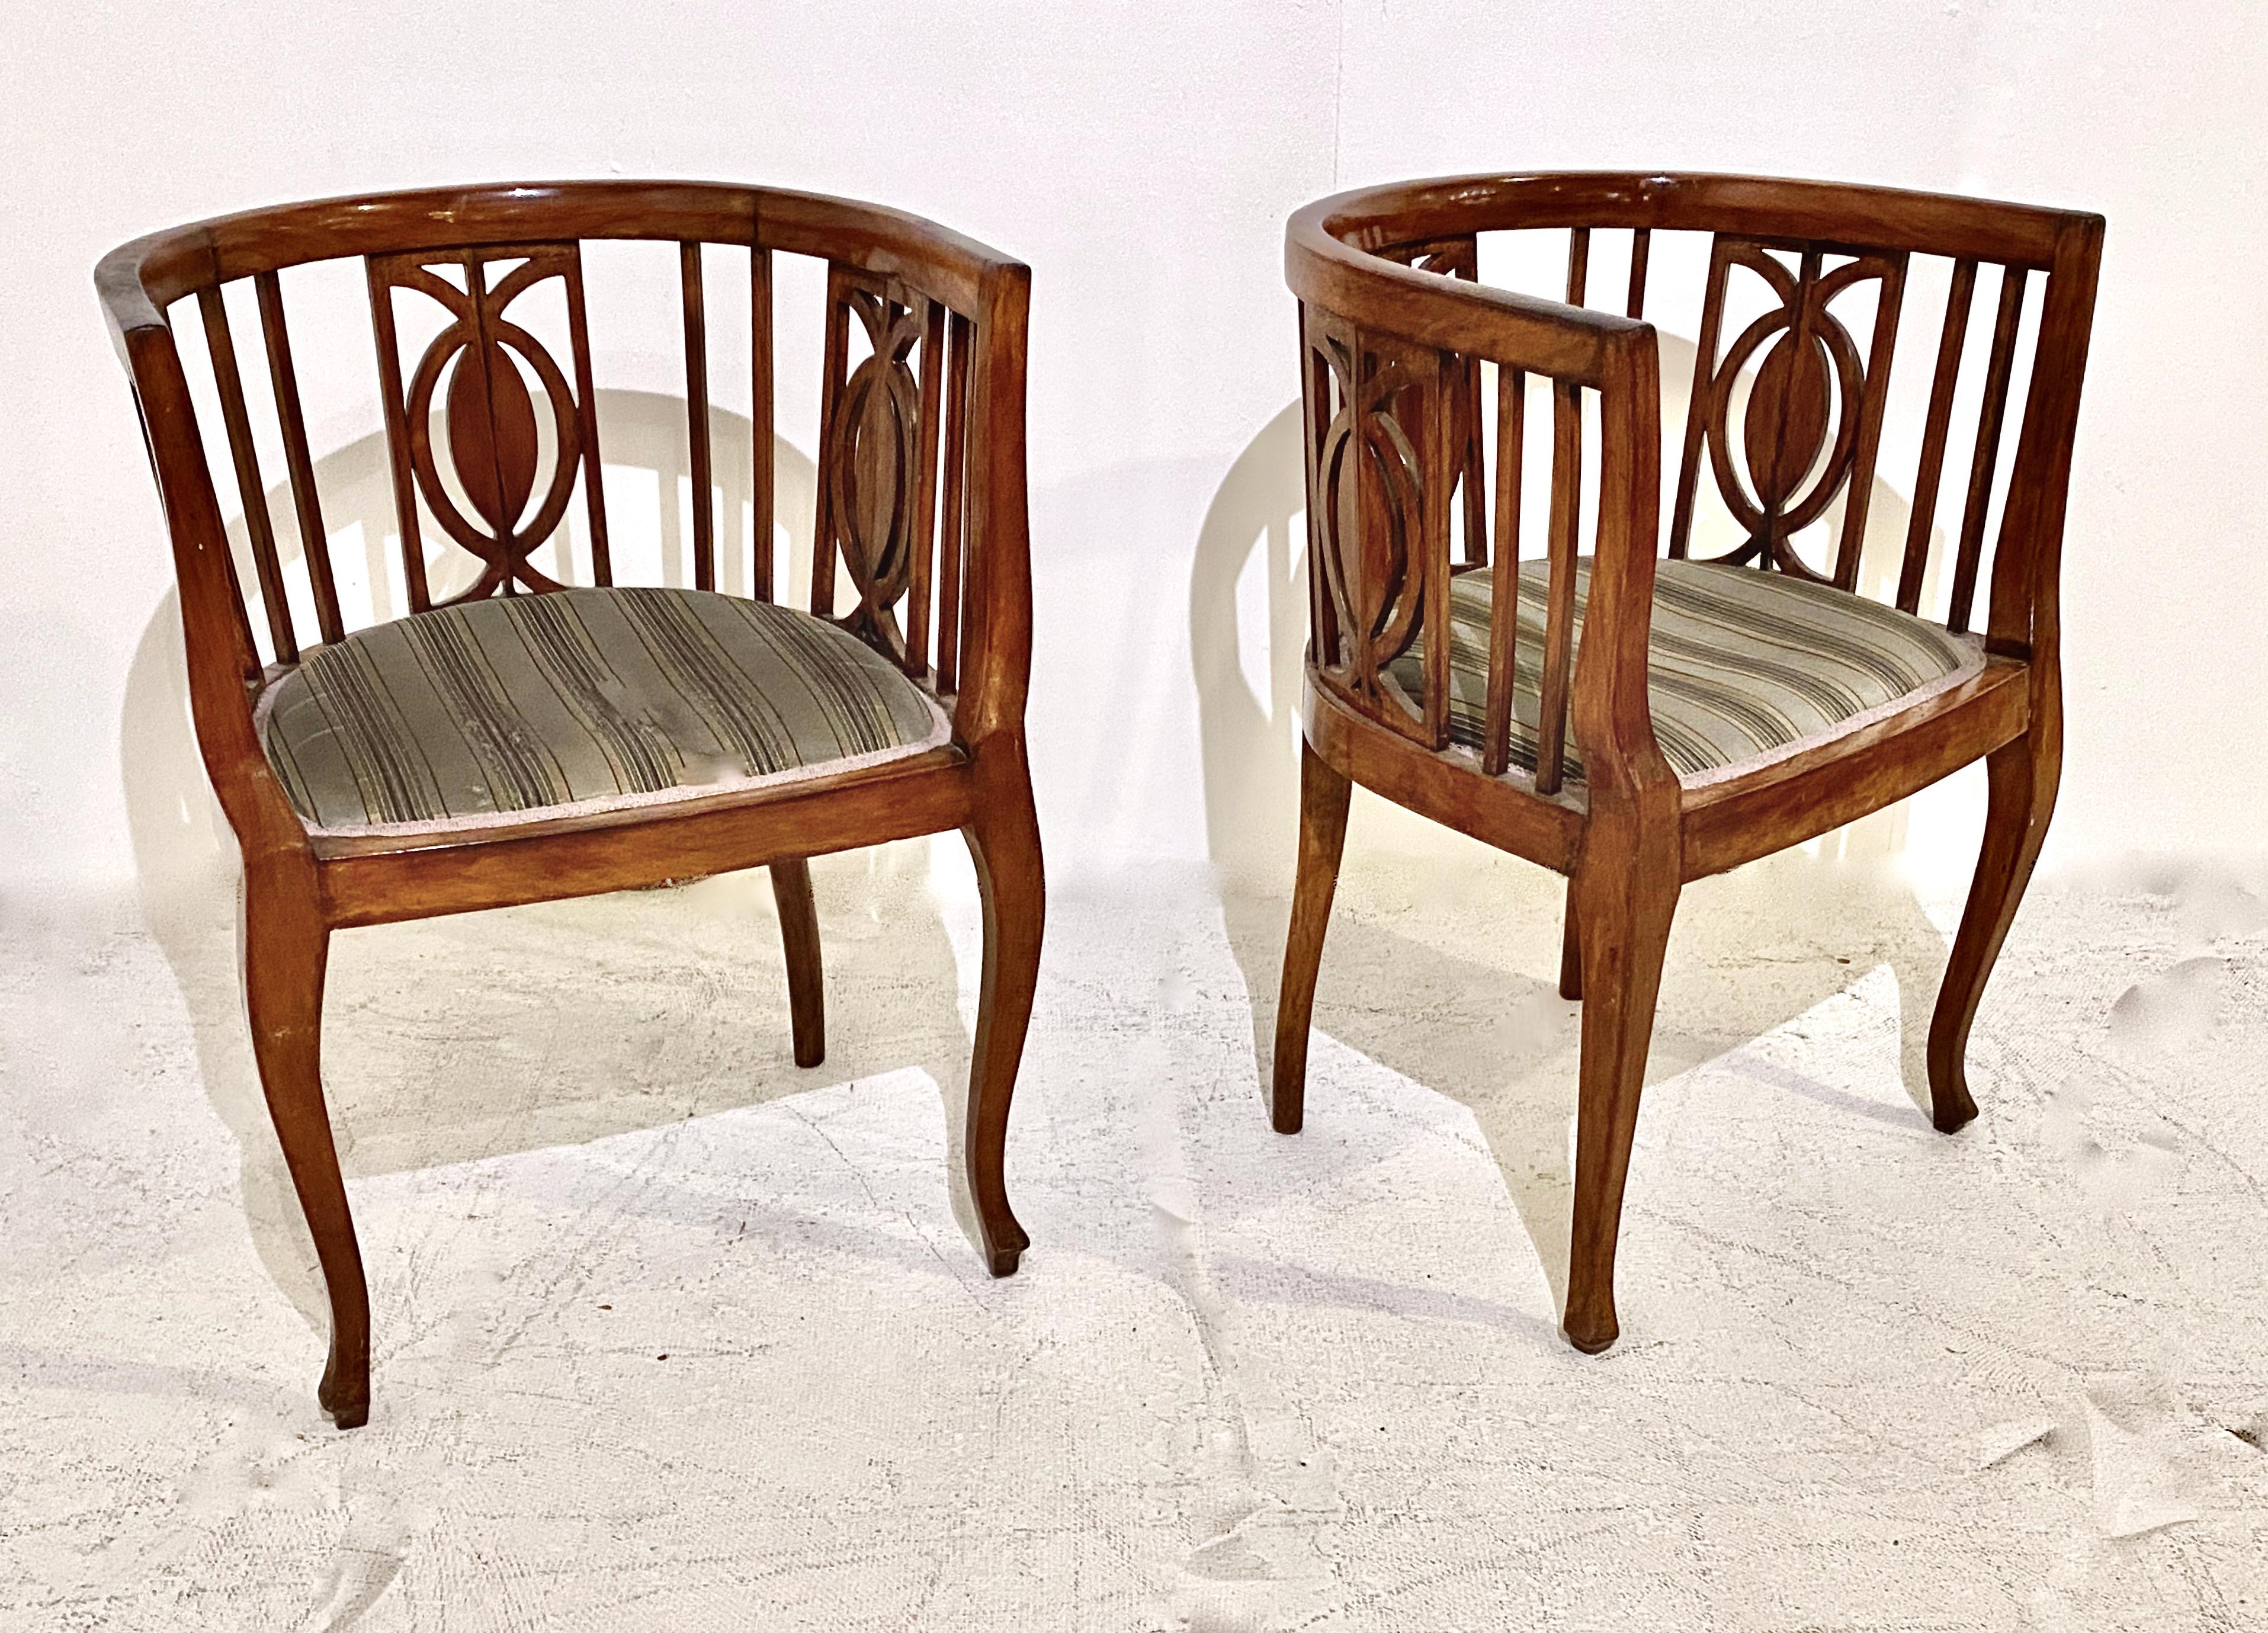 This is an unusual form of Biedermeier Barrel Back chairs in walnut. The barrel back is configured of open bars with three profiles of abstracted pineapple* silhouettes spaced between the bars. The abstracted form of the pineapple lends a lightness,